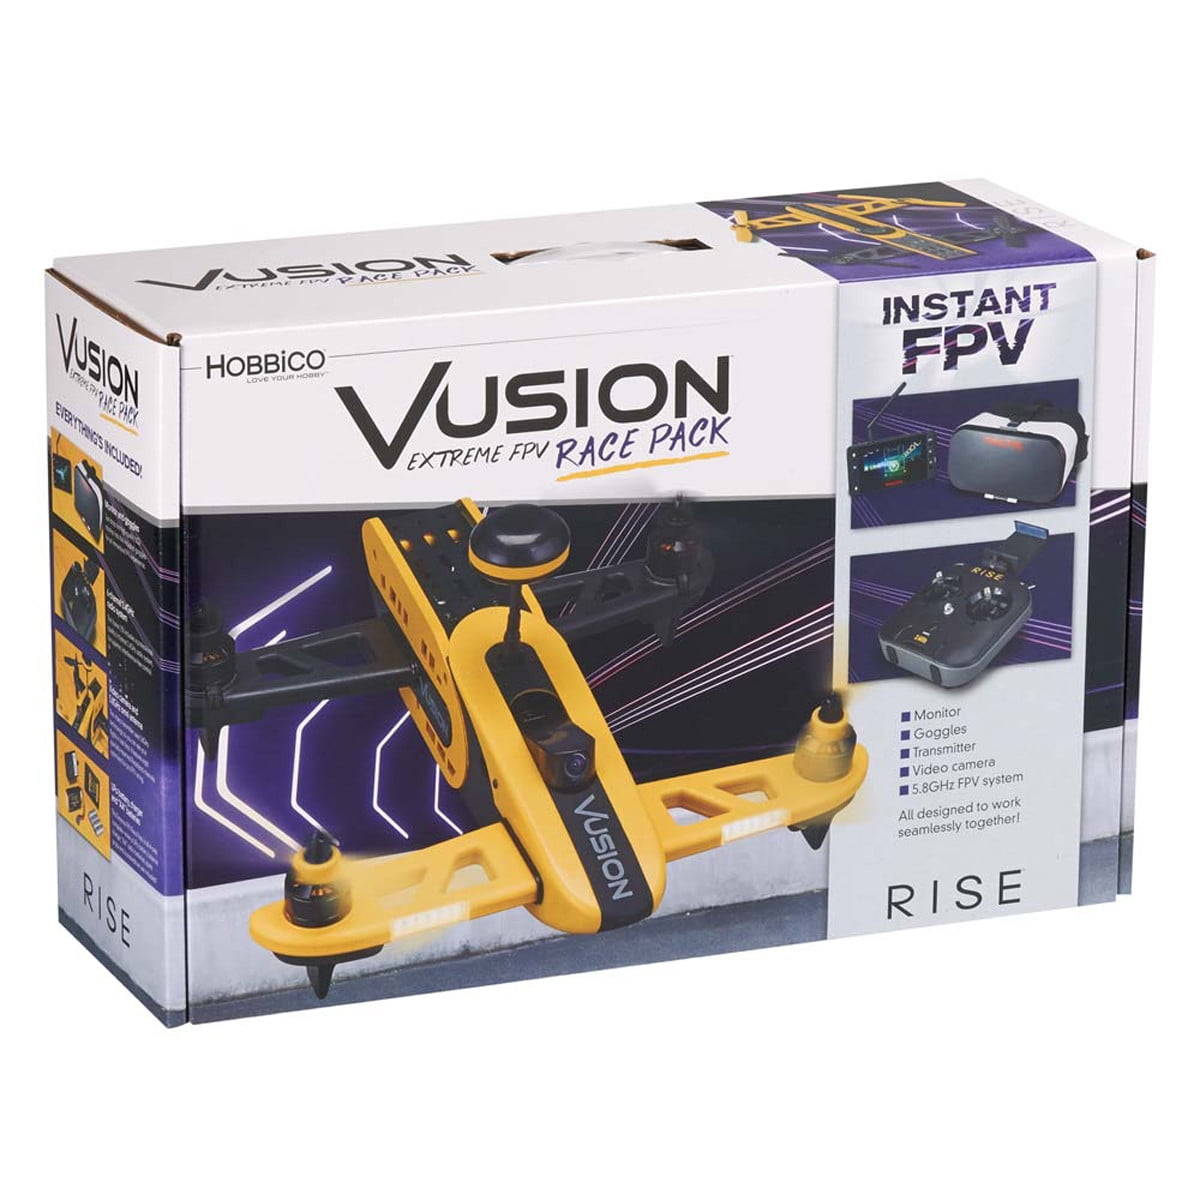 vusion extreme fpv race pack